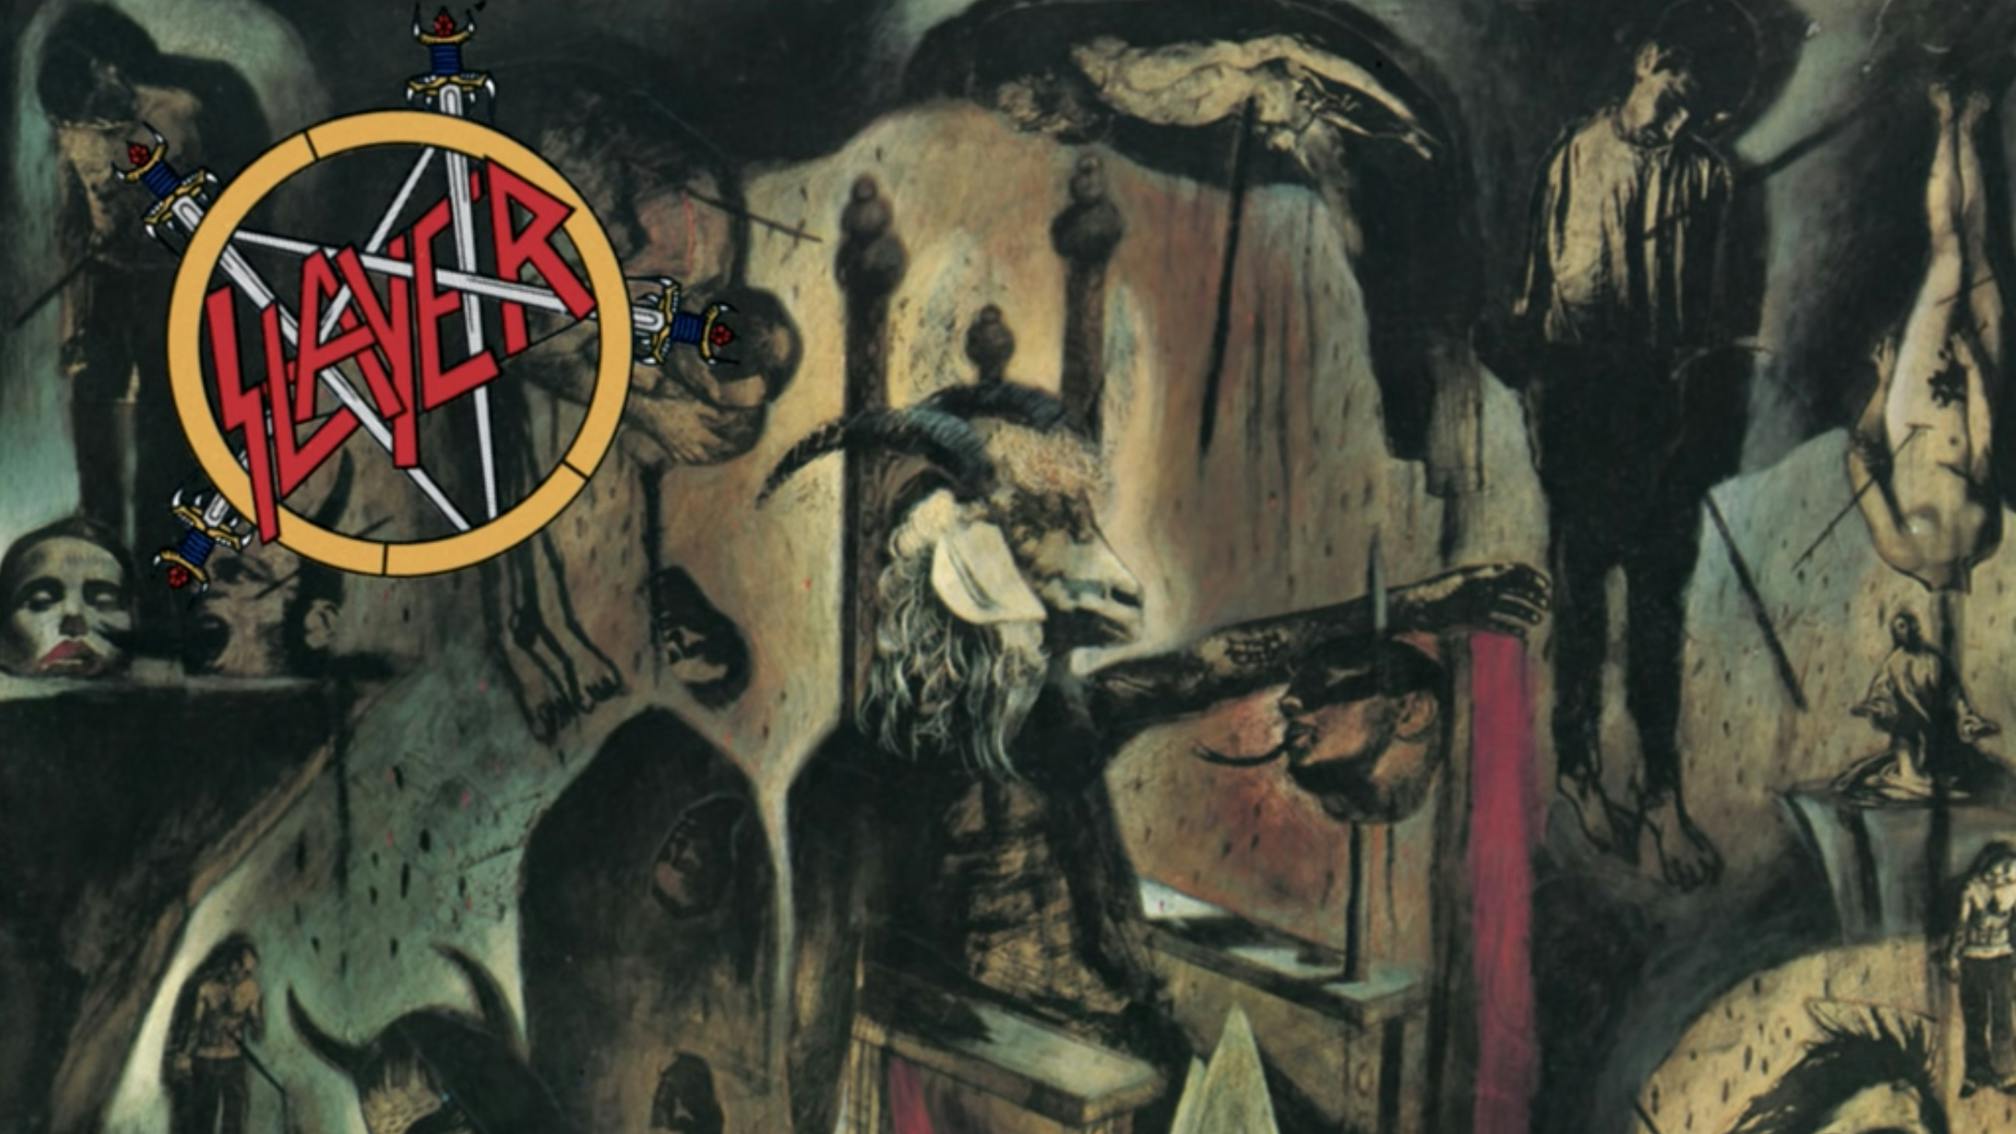 Slayer’s Reign In Blood is still the greatest thrash album of all time